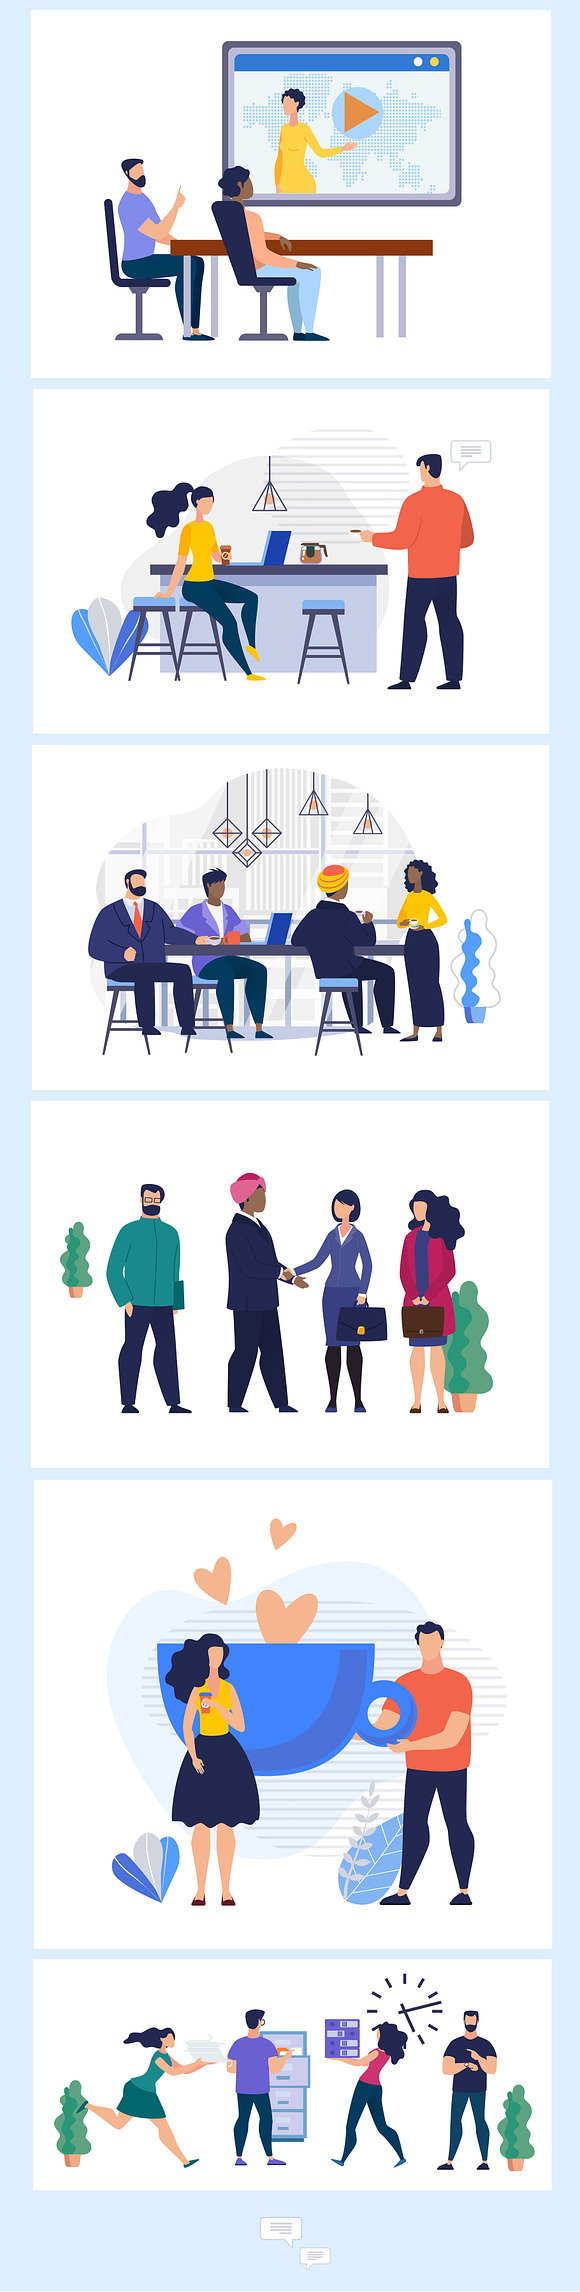 Office Work Vector Scenes in Illustrations - product preview 2